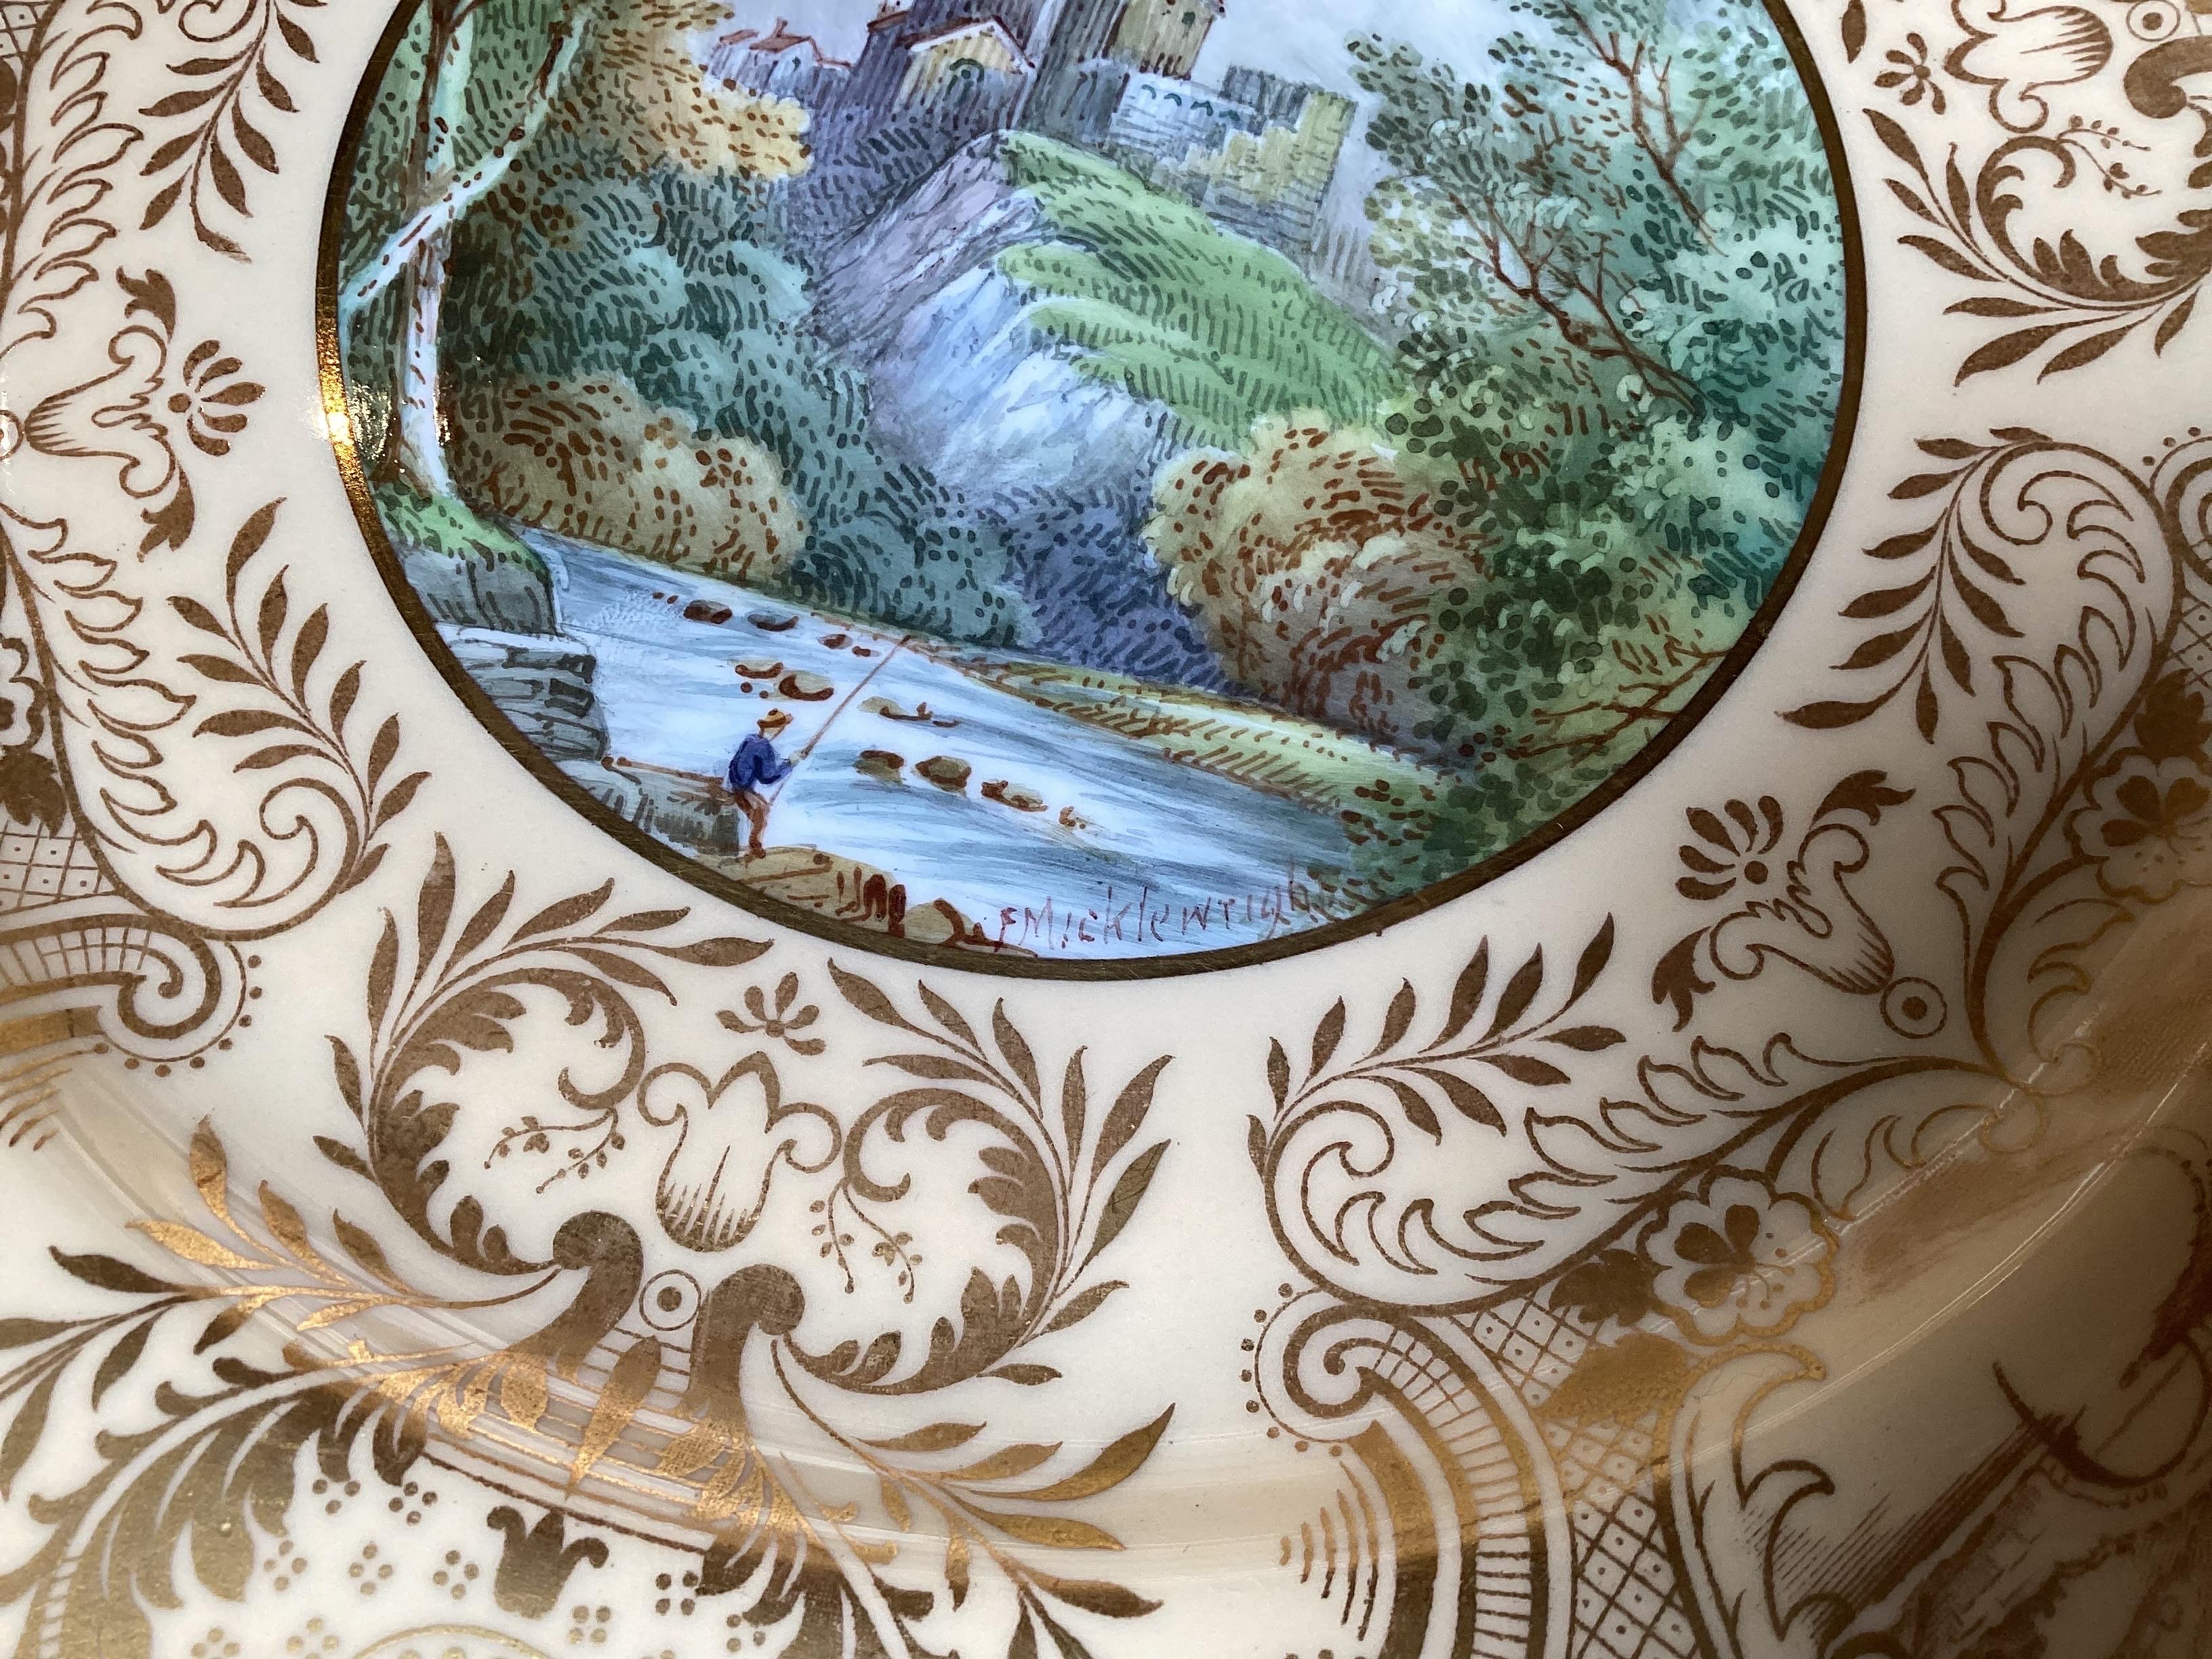 A Set of 12 English cabinet plates by Cauldon, retailed by Davis Collamore NYC. All different scenes of English buildings, castles & churches. All in excellent condition

Signed by F. Micklewright, the painting is detailed and the colors are